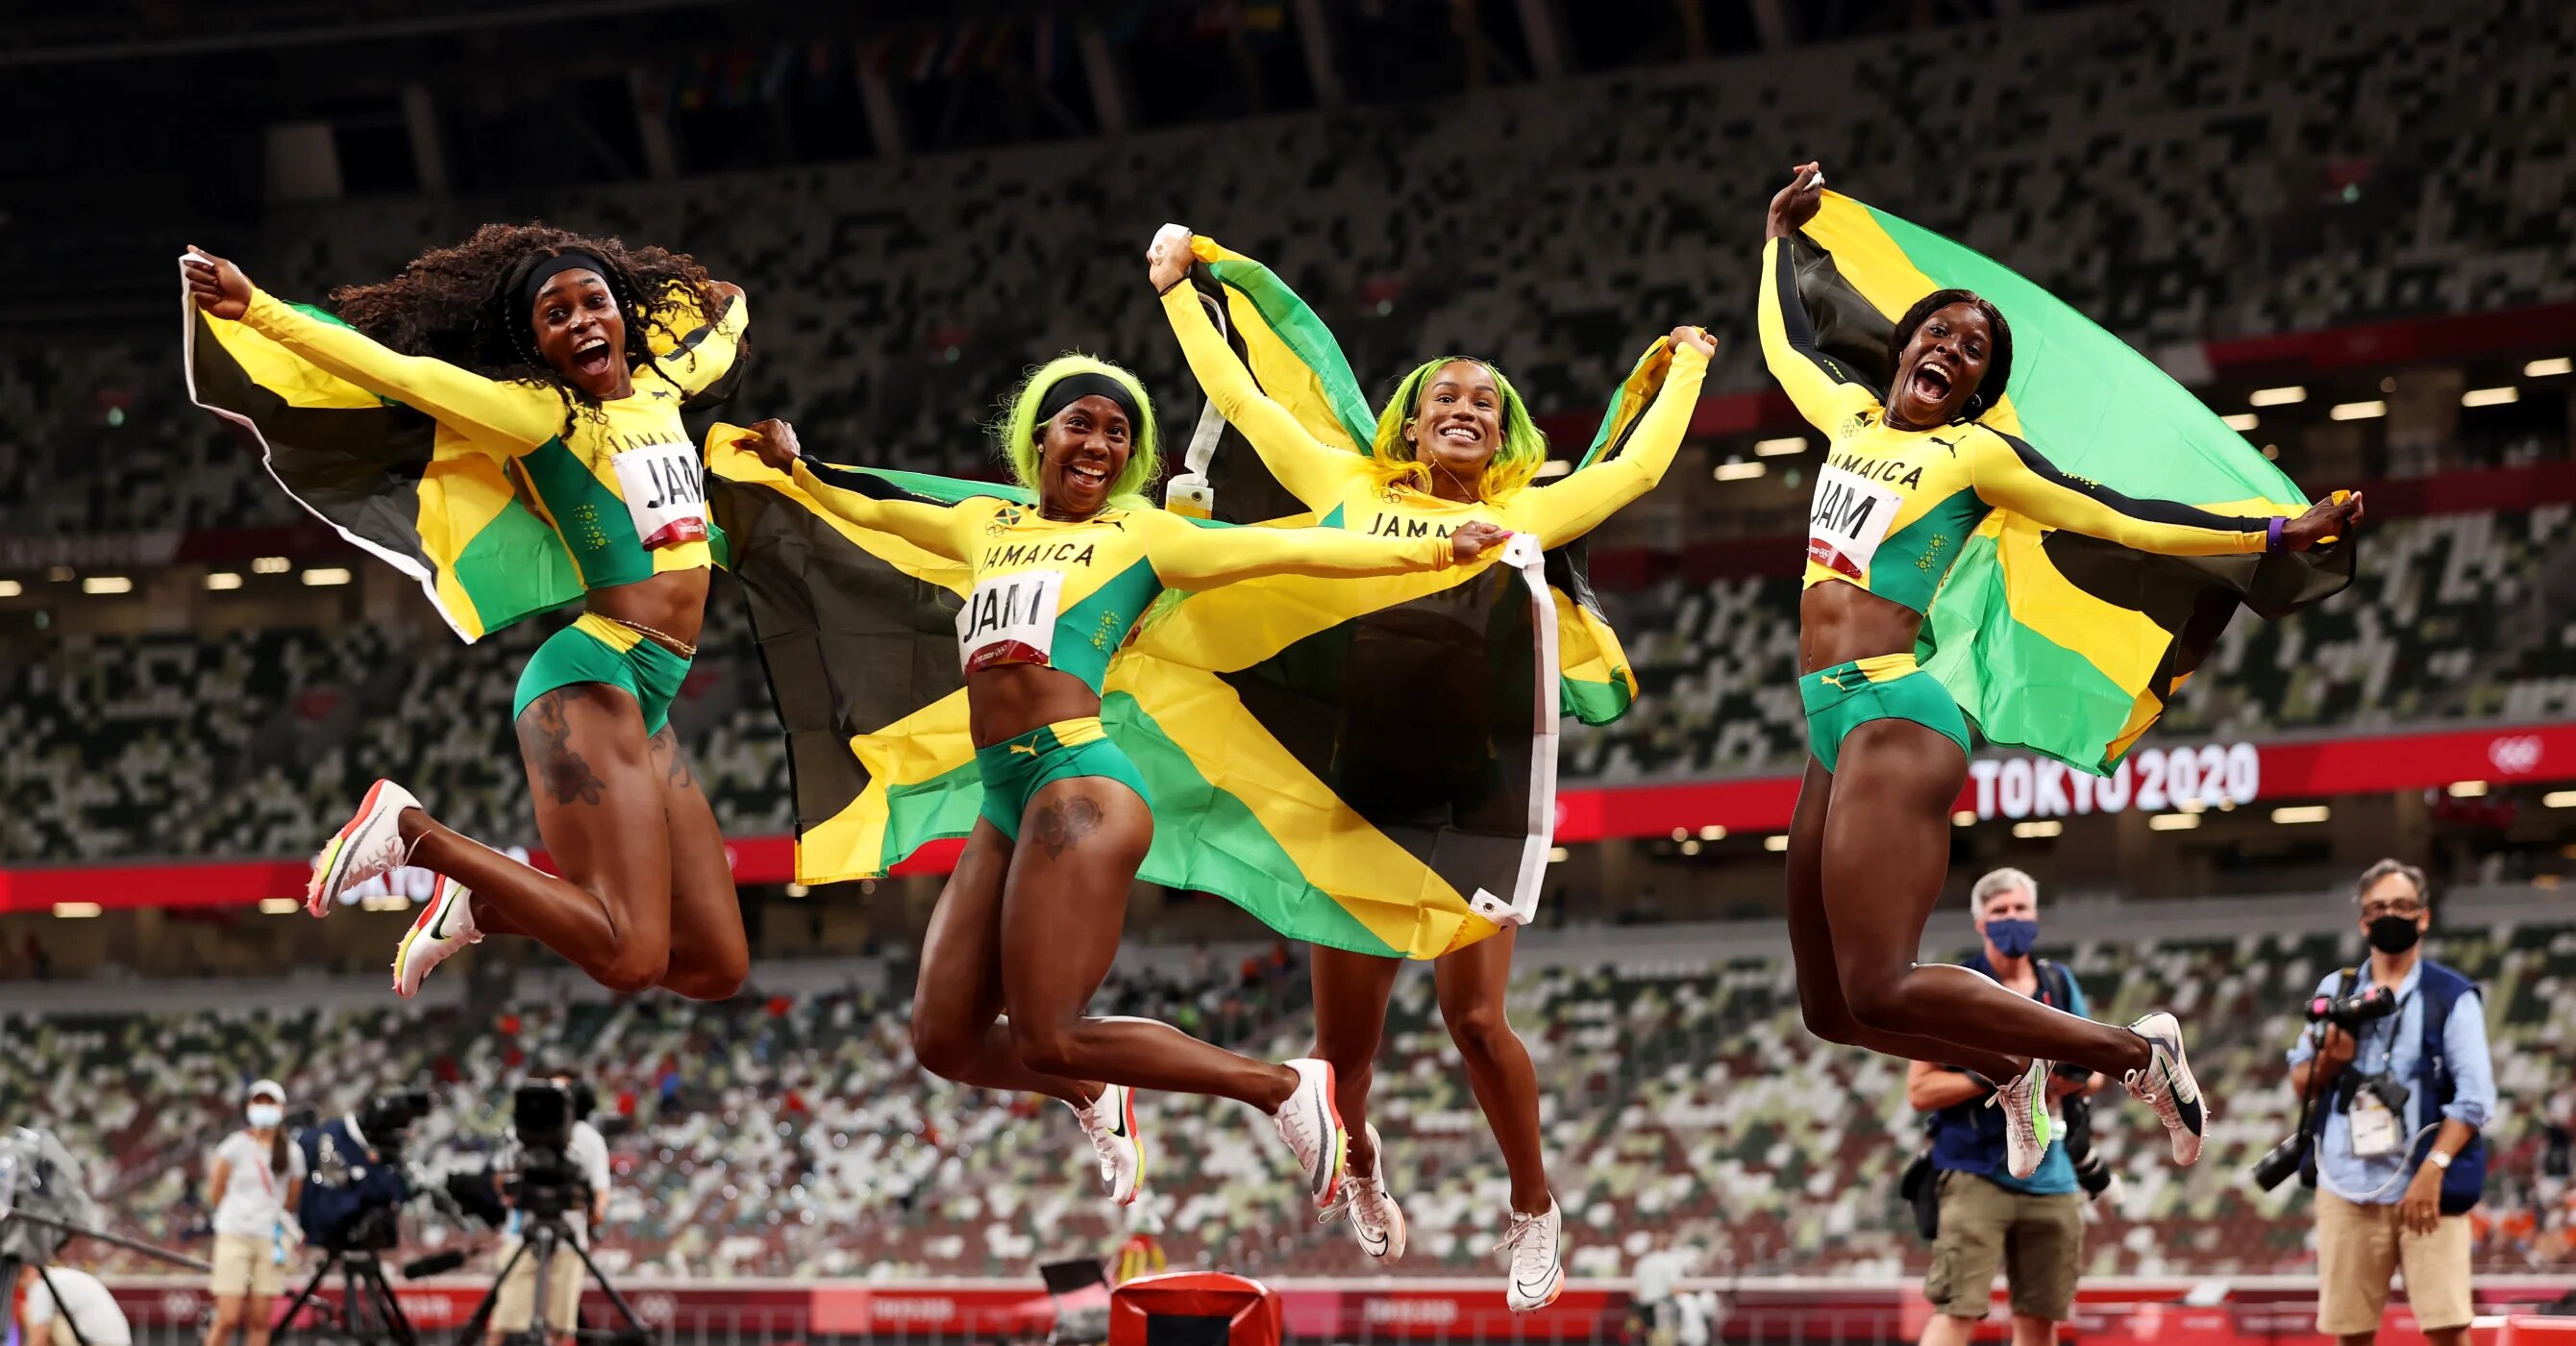 Briana Williams, Elaine Thompson-Herah, Shelly-Ann Fraser-Pryce and Shericka Jackson of Team Jamaica celebrate winning the gold medal in the Women's 4 x 100m Relay Final on day fourteen of the Tokyo 2020 Olympic Games at Olympic Stadium on August 06, 2021 in Tokyo, Japan. (Photo by David Ramos/Getty Images) 2021 Getty Images